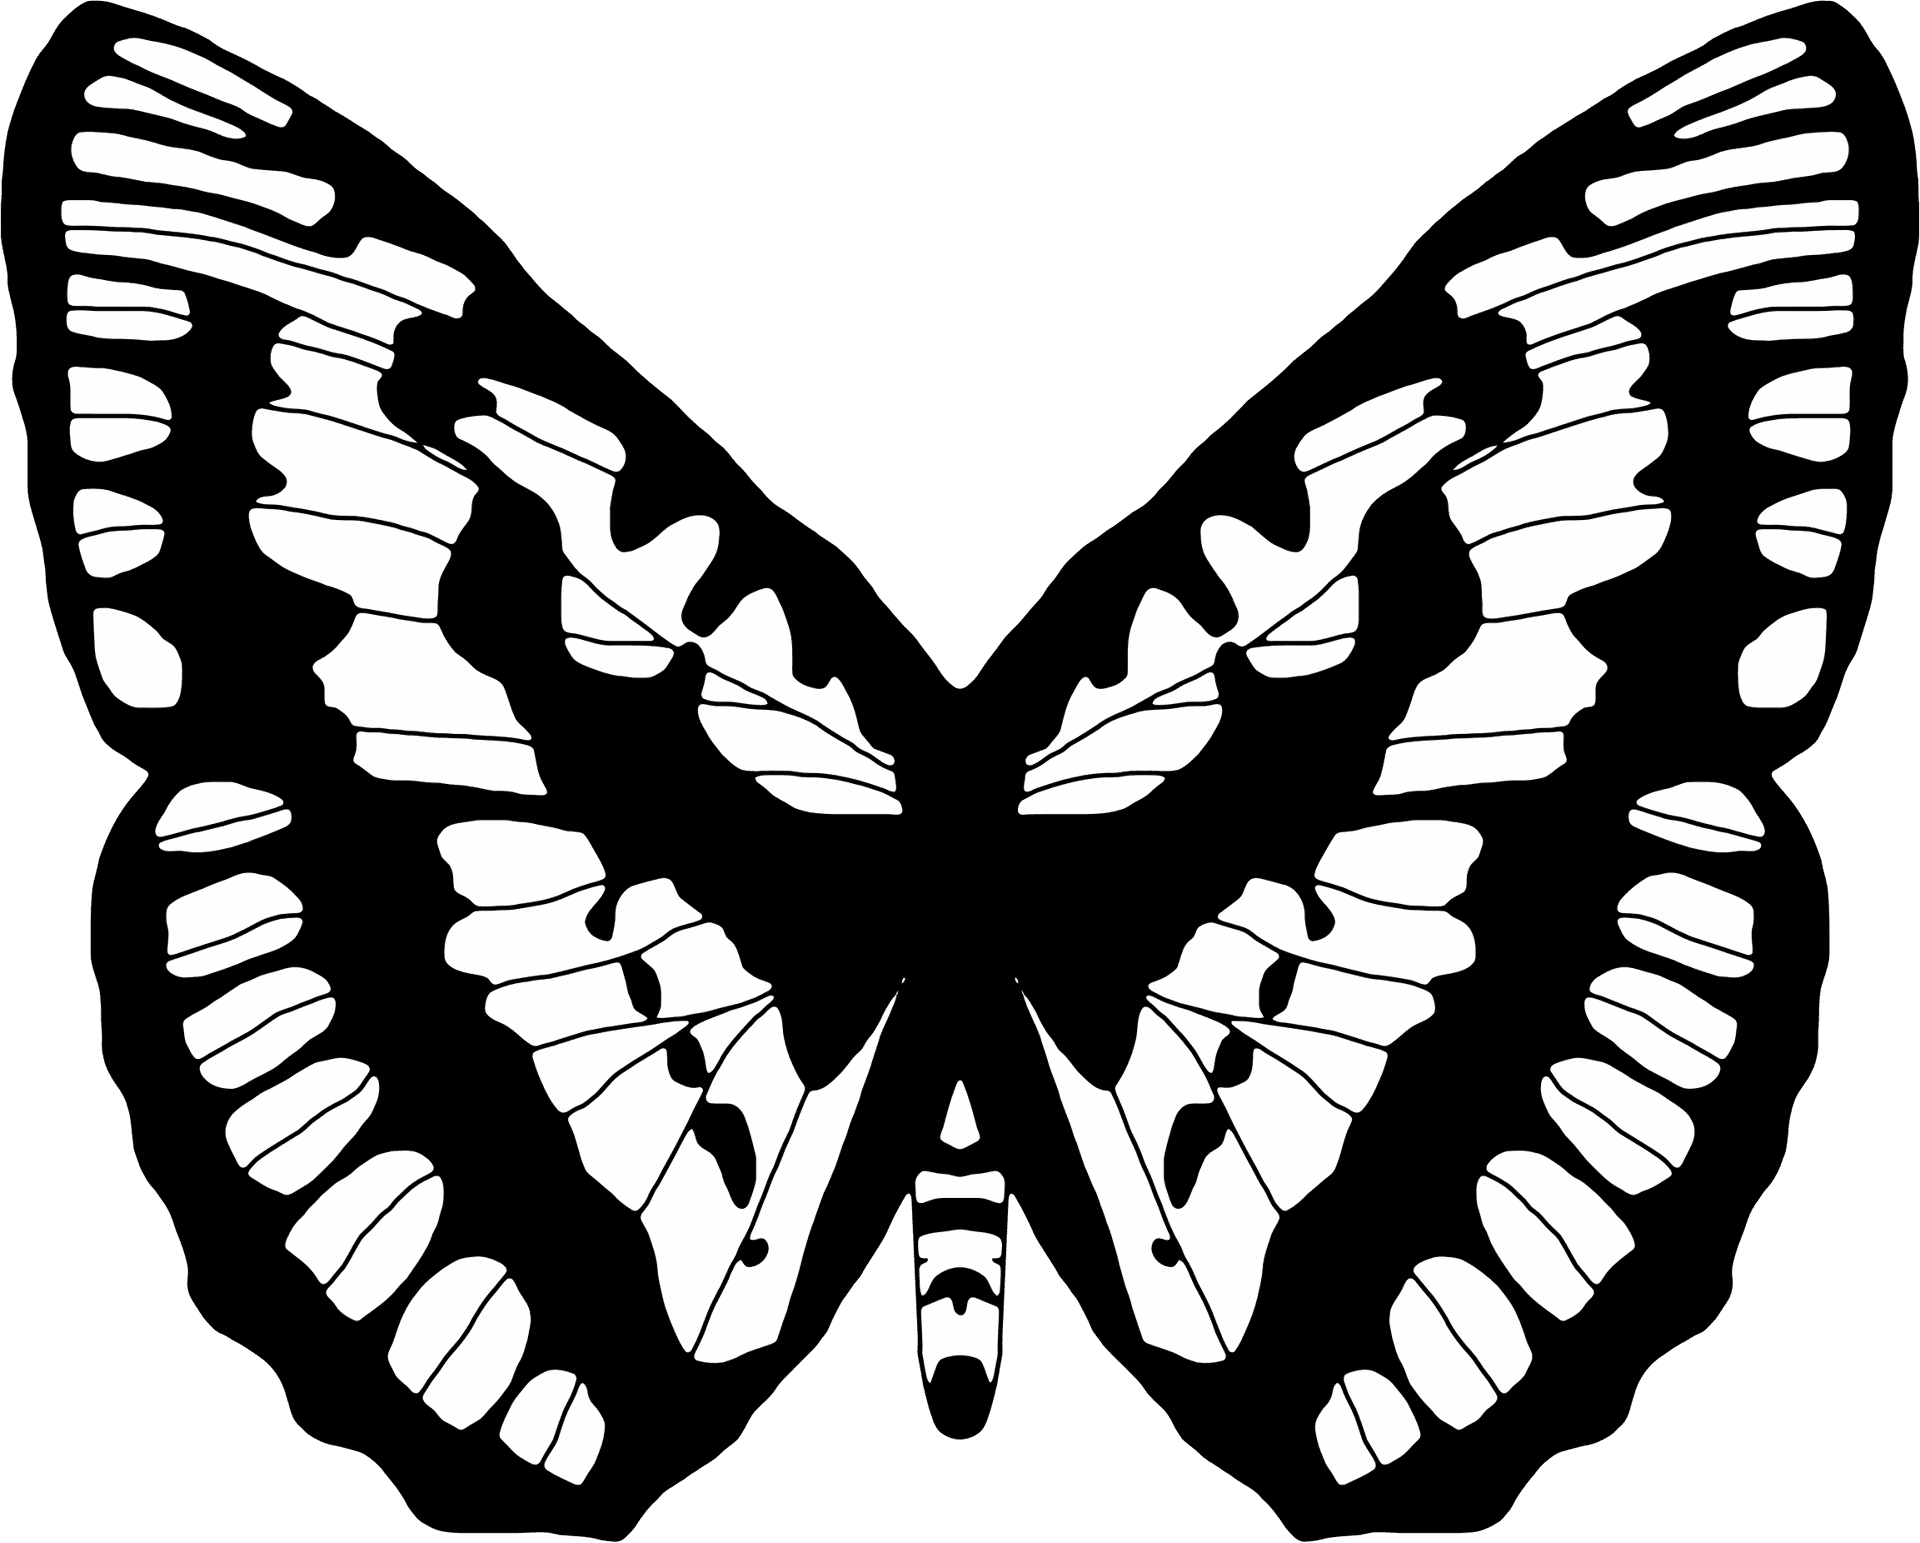 Monochrome Butterfly Illustration.png PNG image